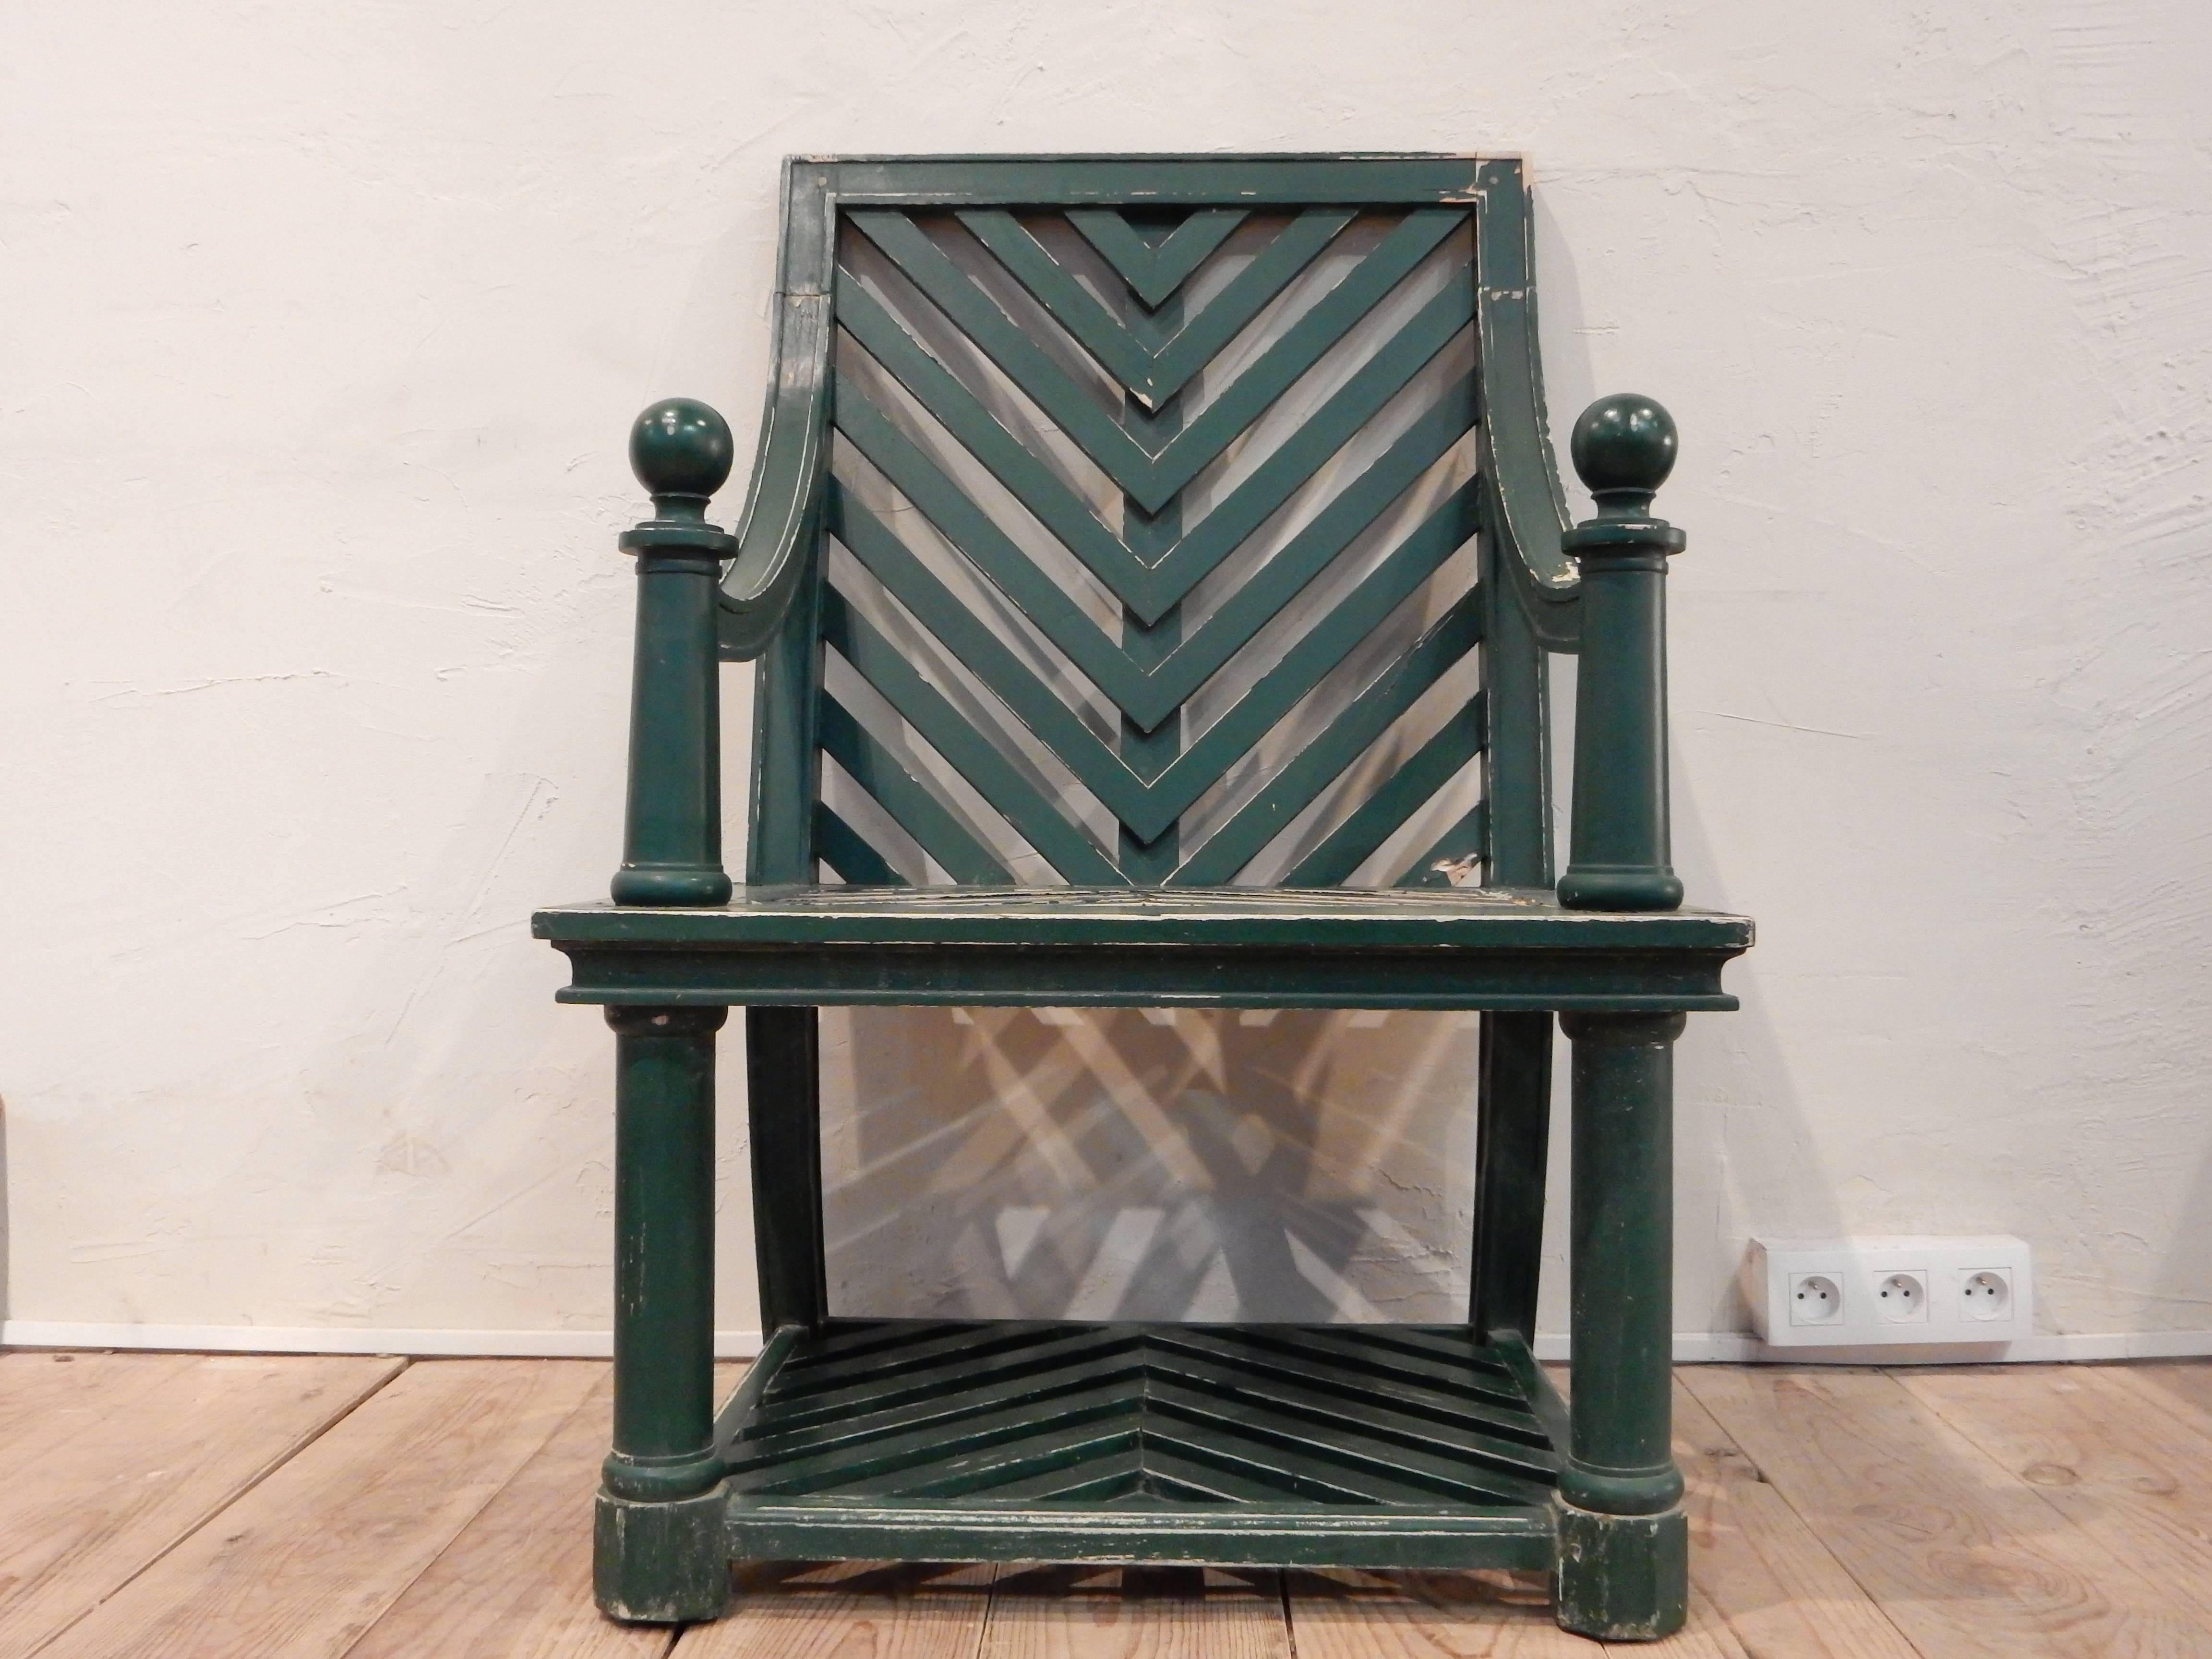 An outside garden armchair created by Emilio Terry (1890-1969) for the Chateau de Groussay, circa 1940. This piece is a réedition from 1991.